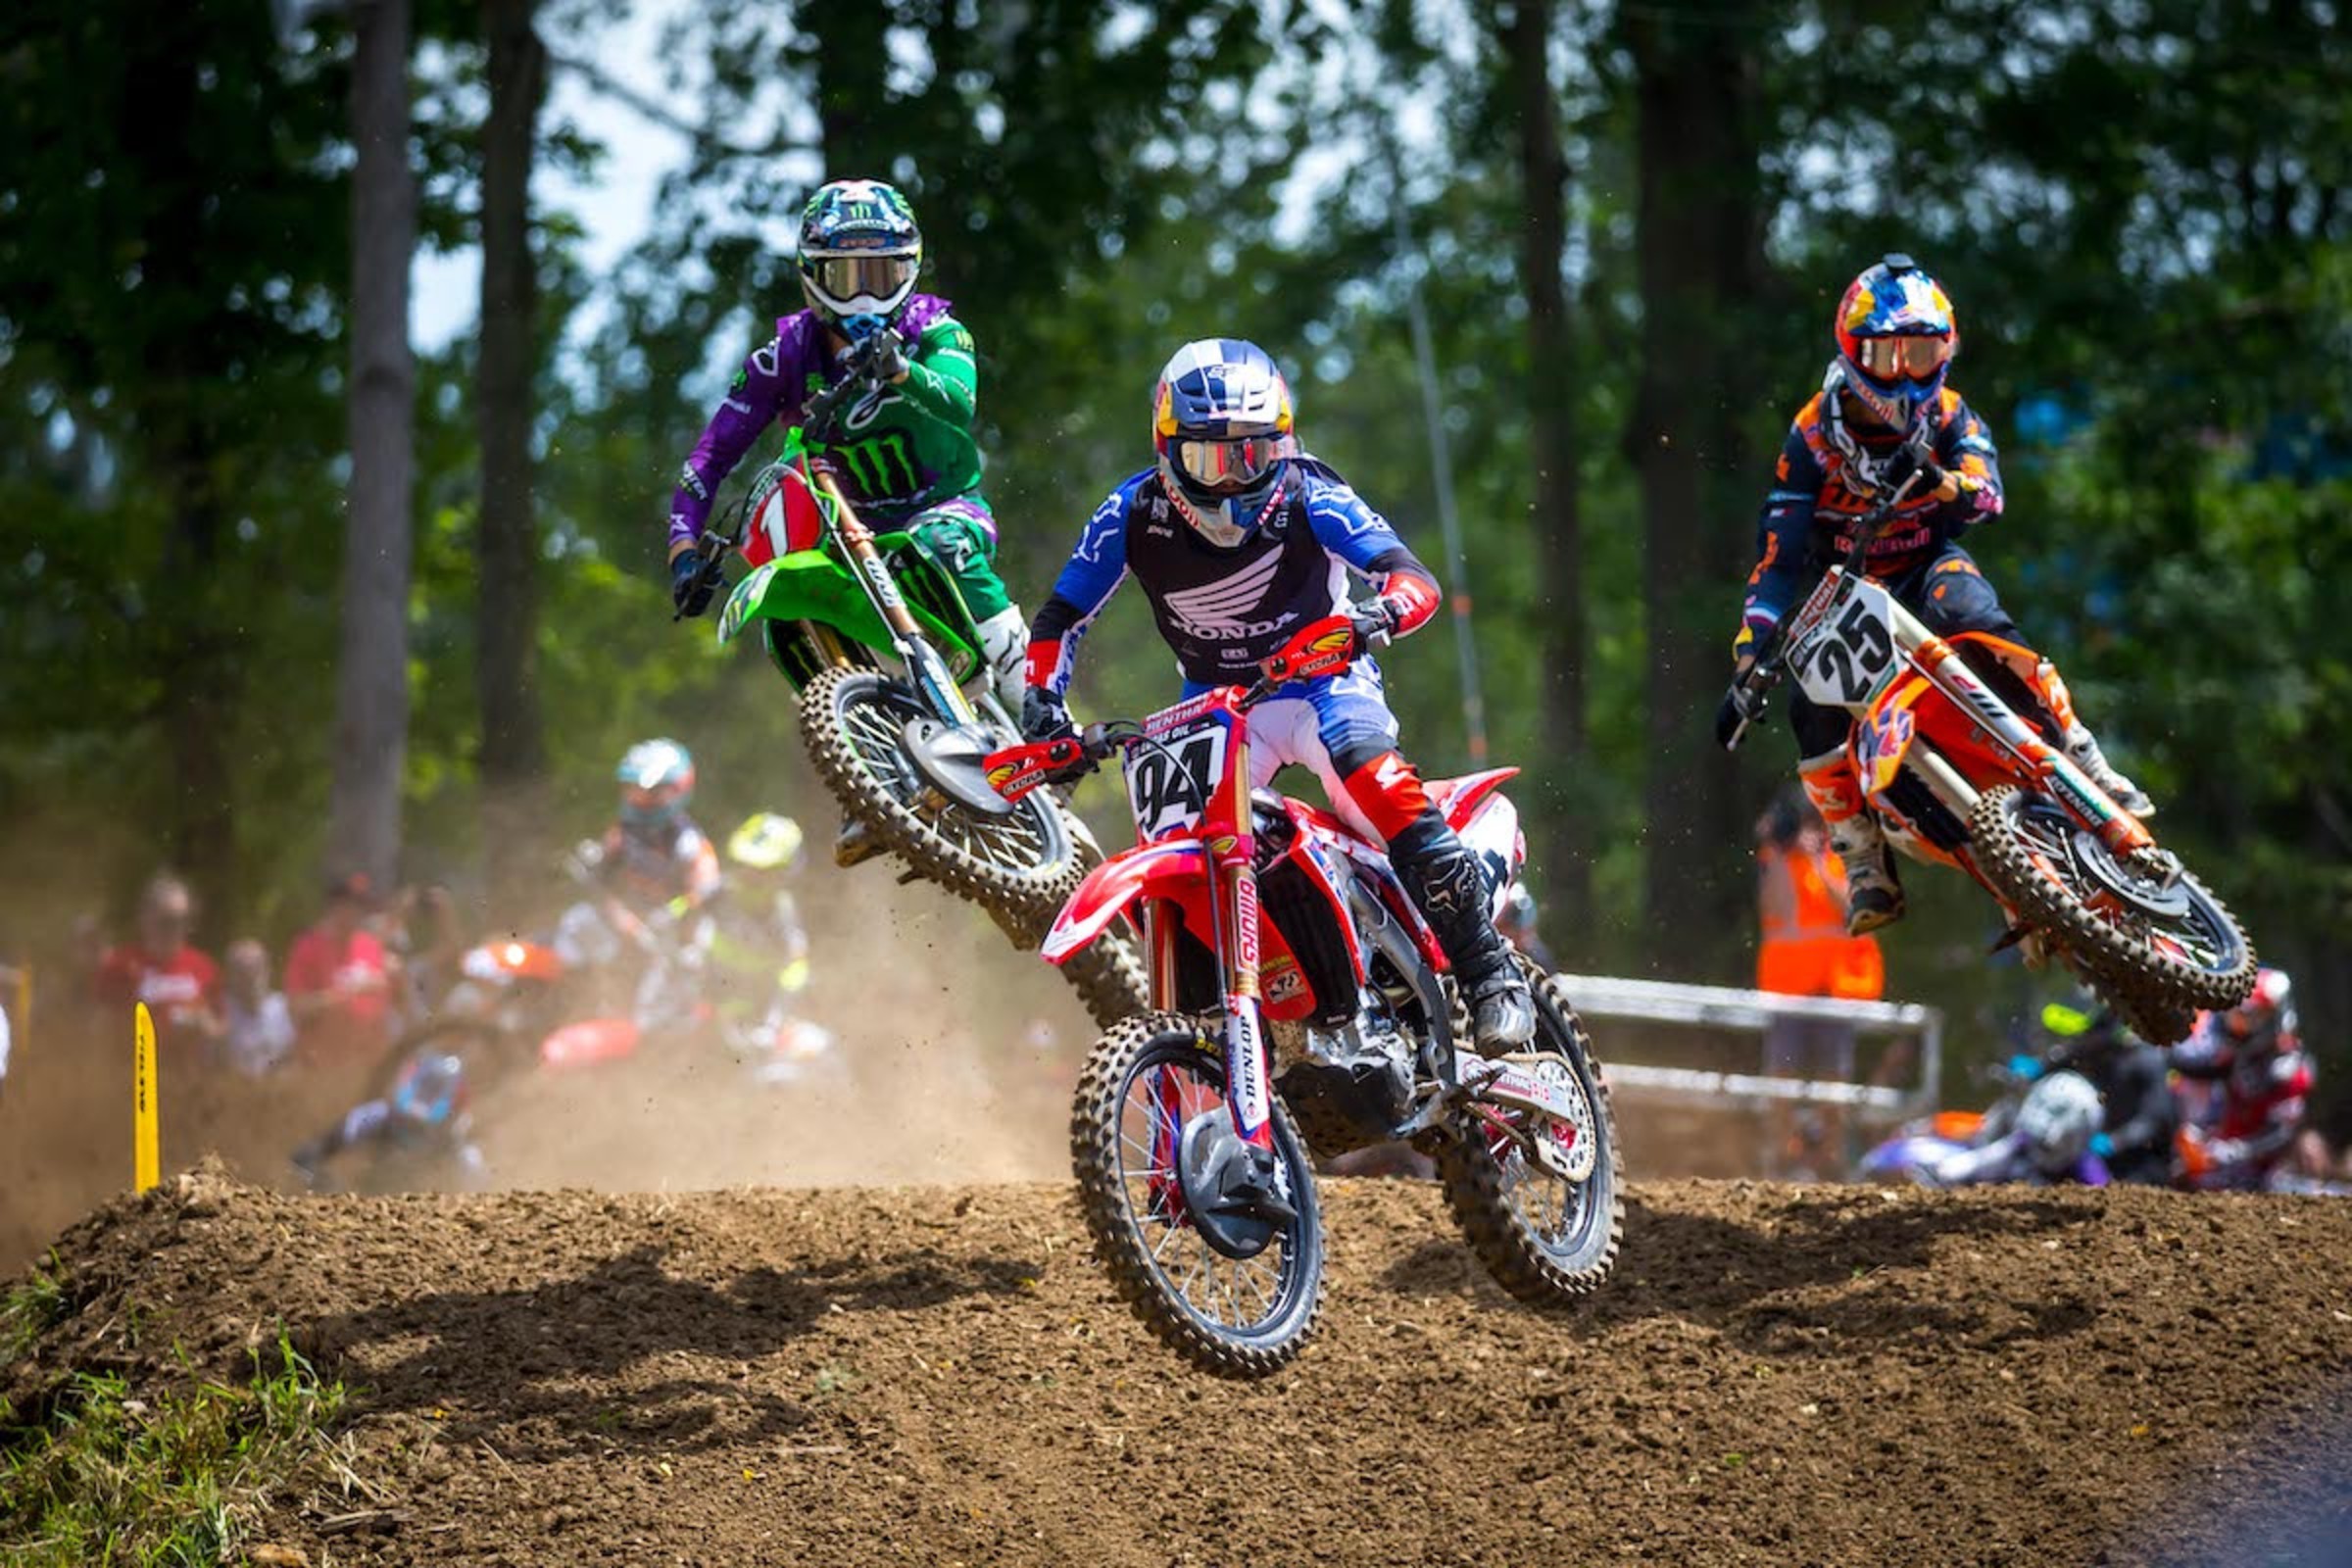 NBC Sports Gold Extends Free On-Demand Access to Pro Motocross Pass for Month of May